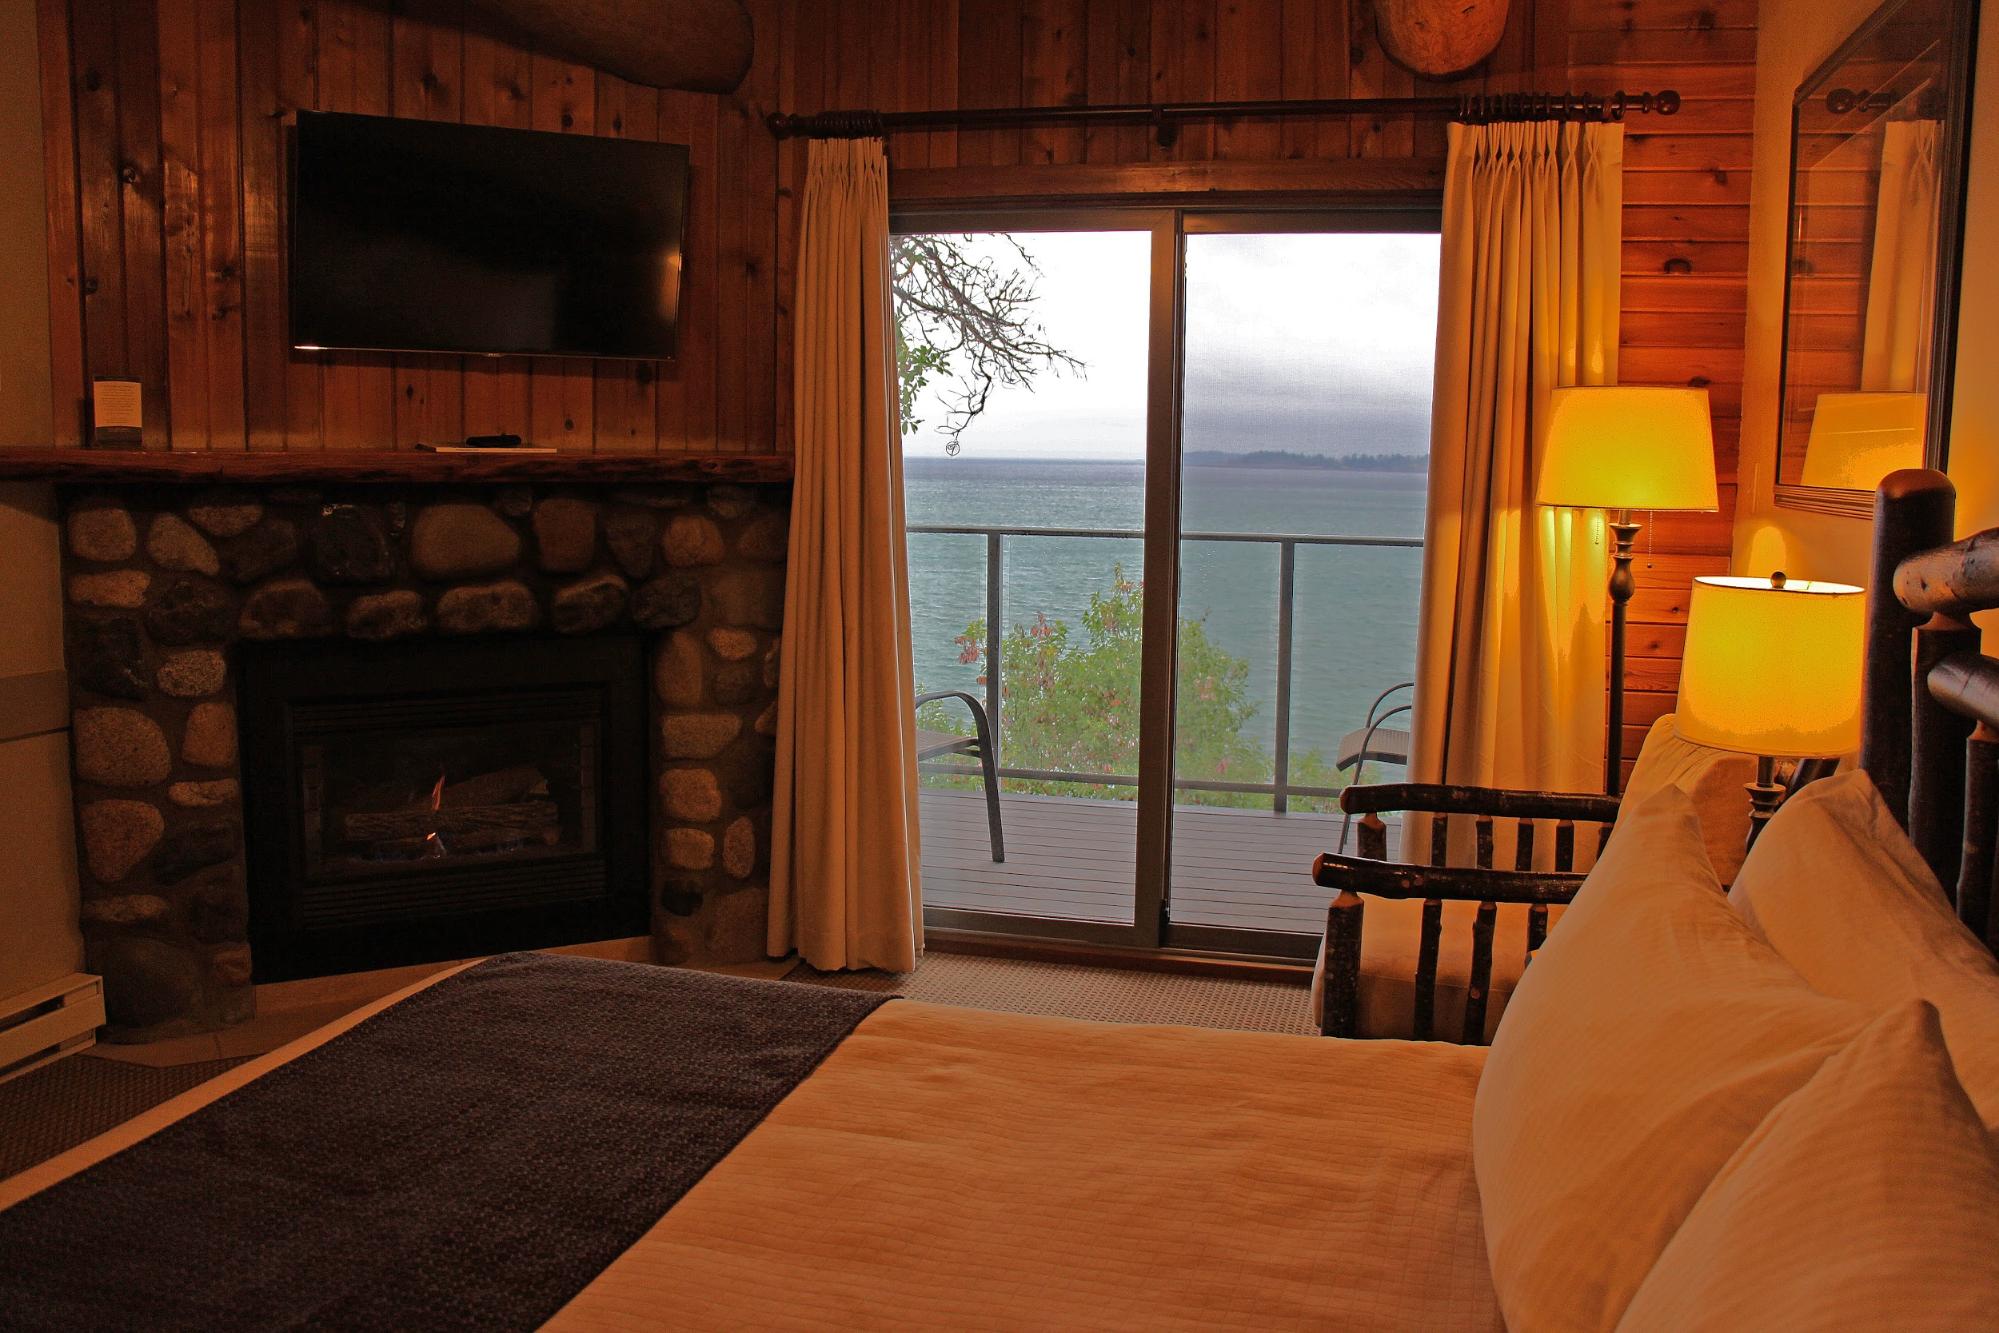 The cozy interior of a resort bedroom with a fireplace and private balcony overlooking the water.